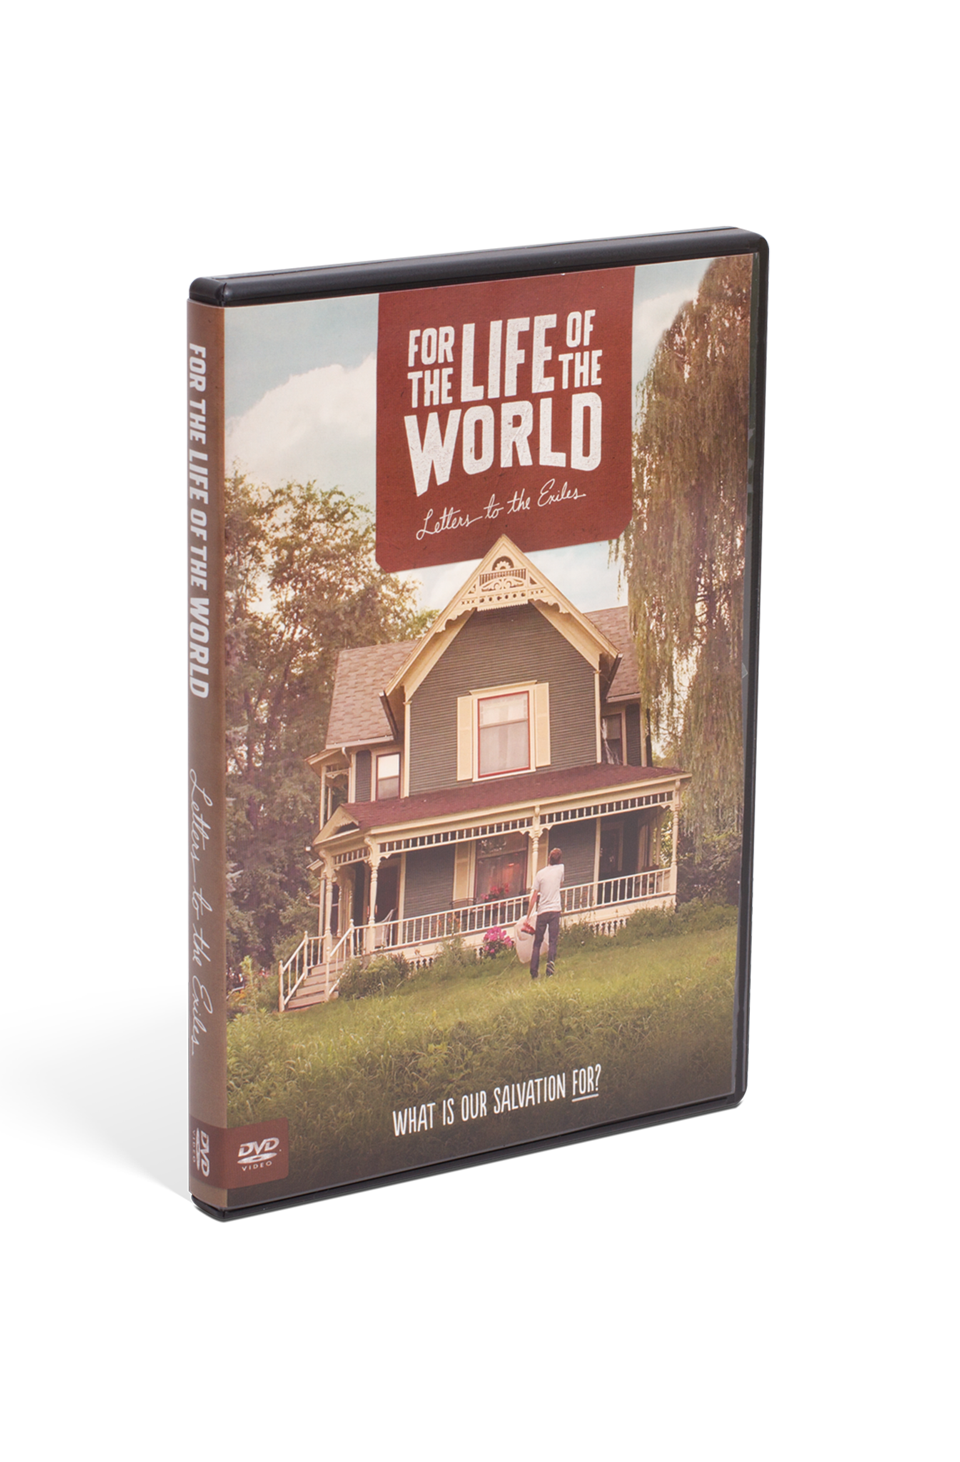 For the Life of the World Feature Film